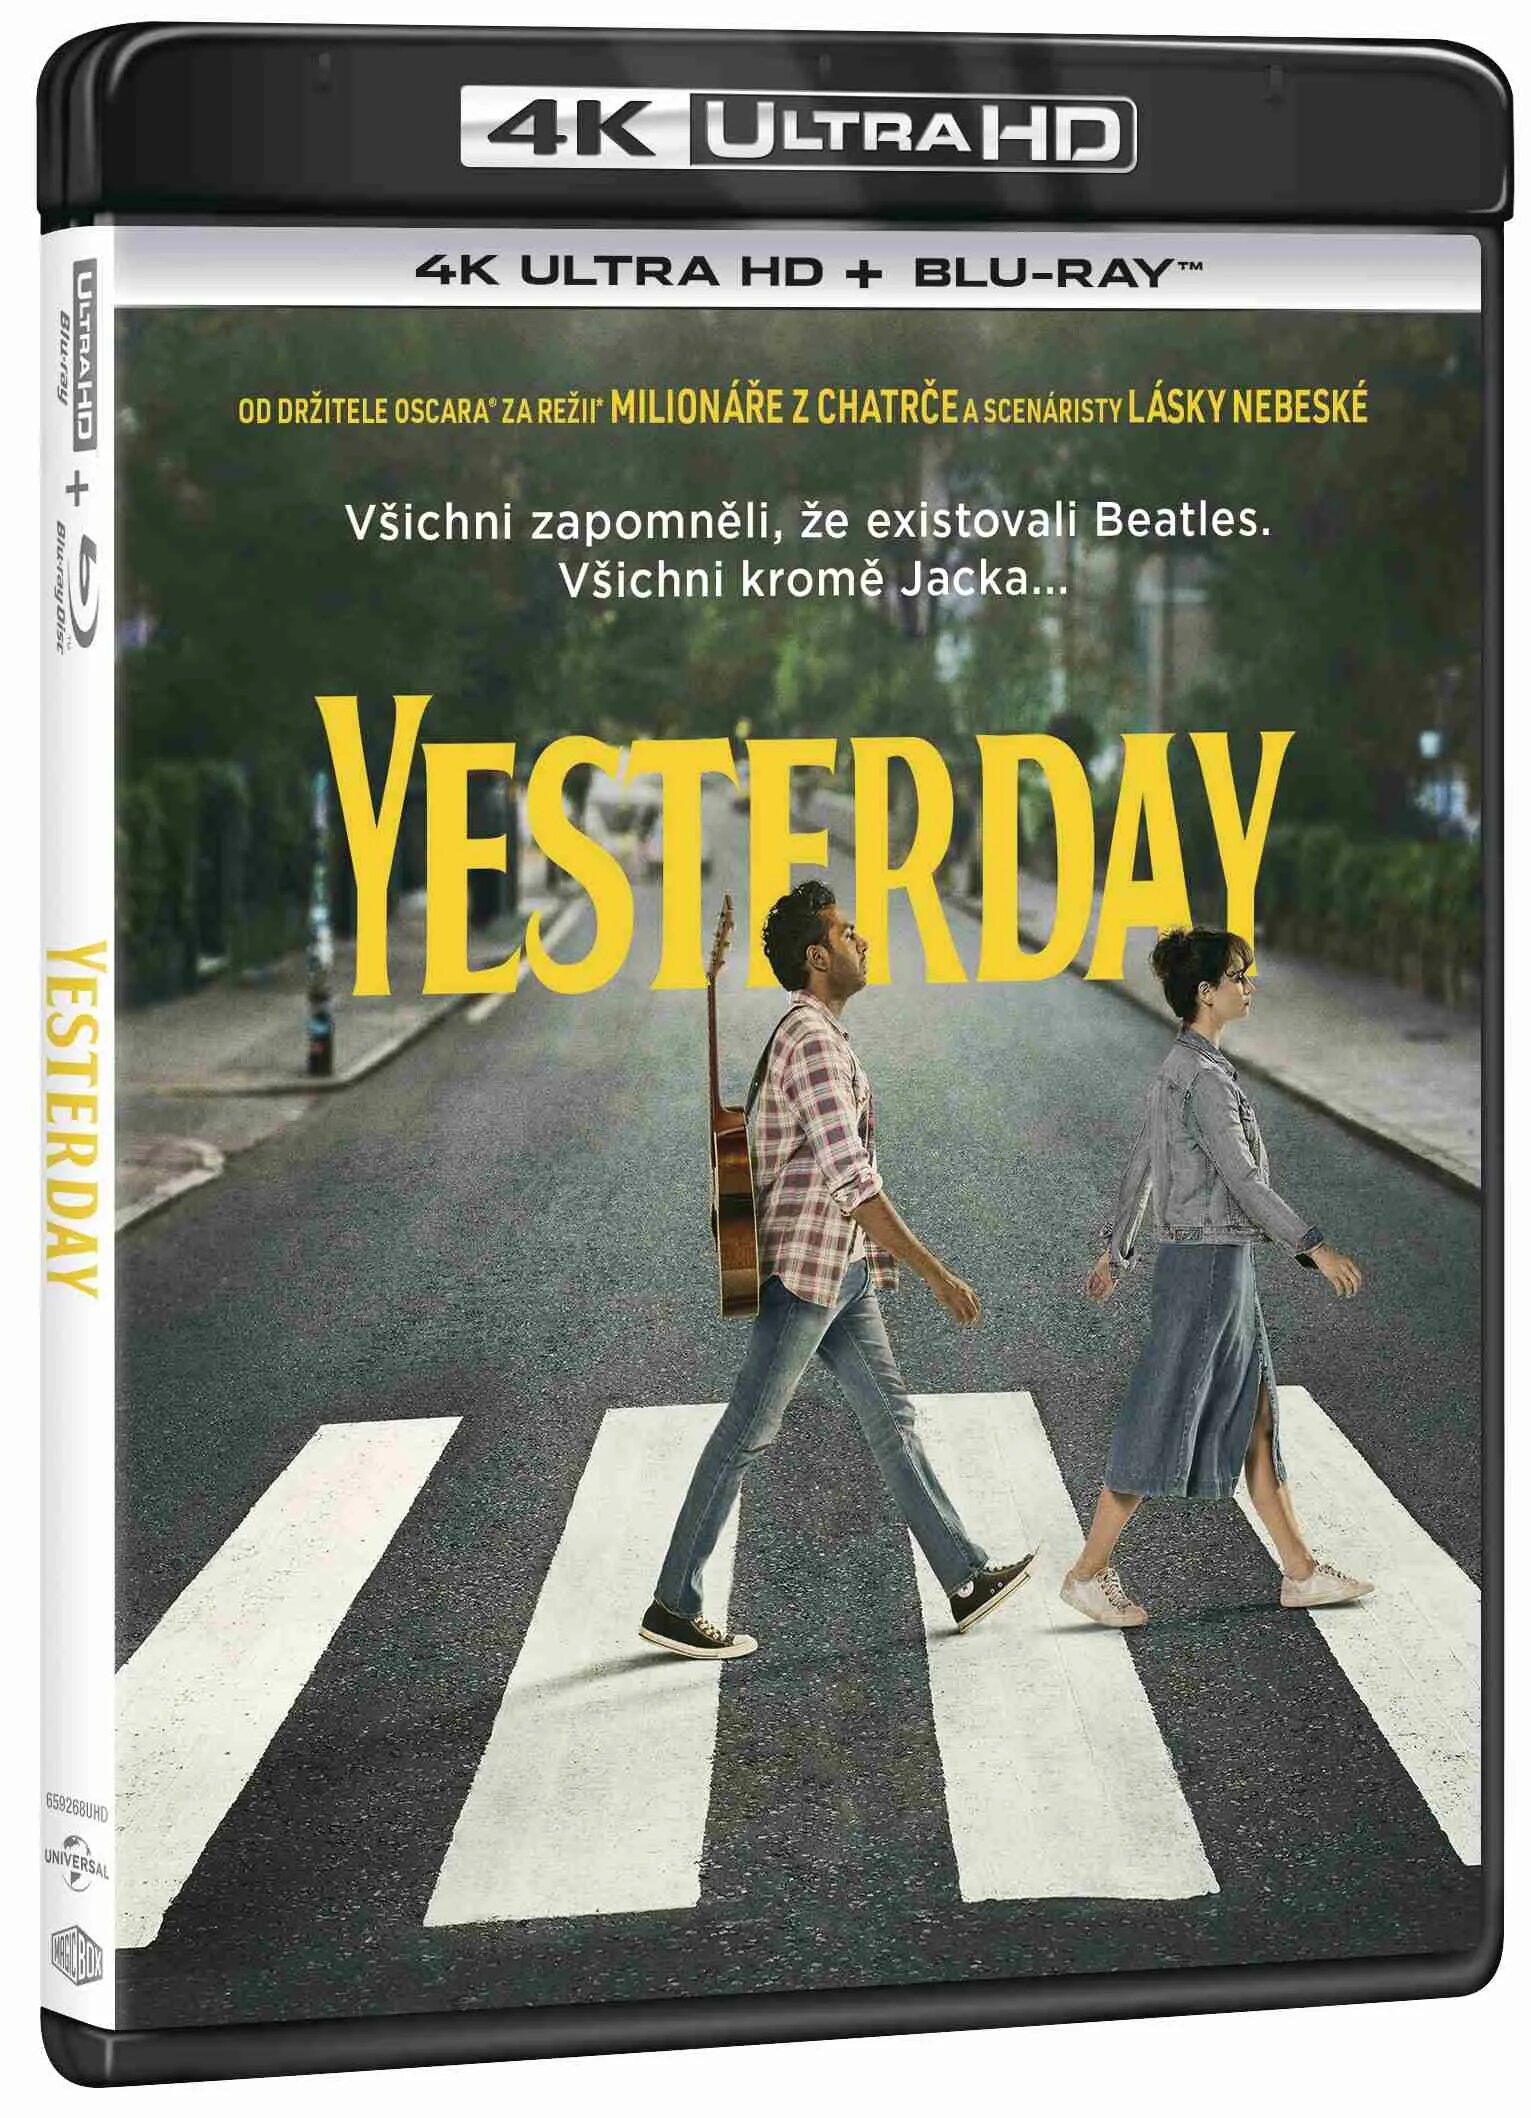 Yesterday (Blu-ray). DVD. Yesterday. I bought that book